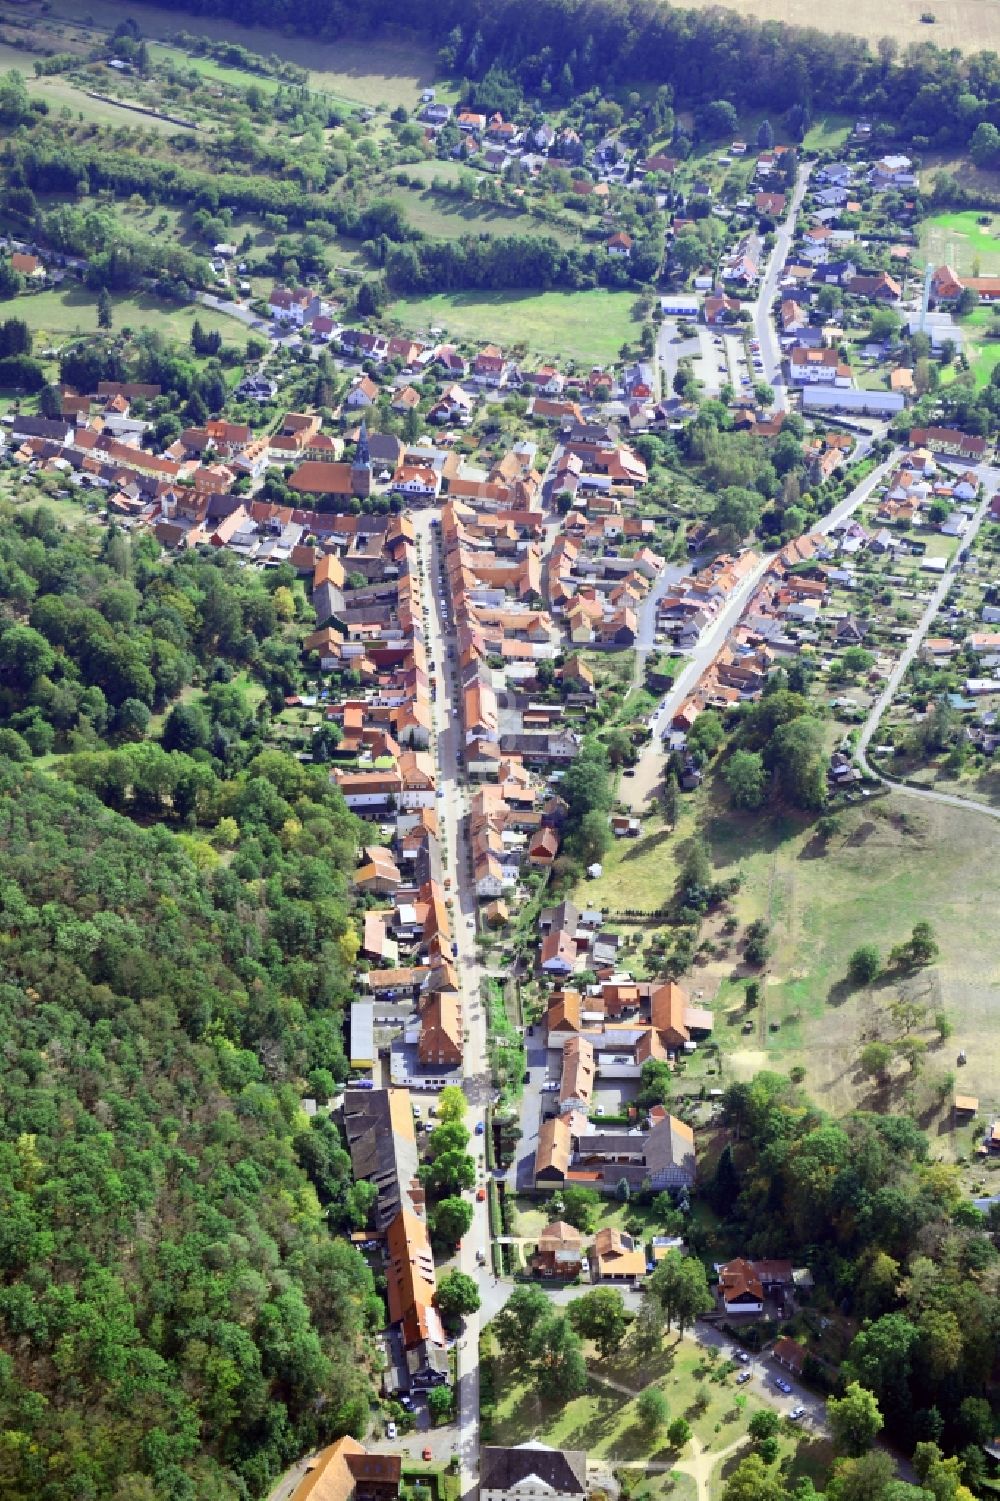 Neustadt/Harz from above - Surrounded by forest and forest areas center of the streets and houses and residential areas in Neustadt/Harz in the state Thuringia, Germany